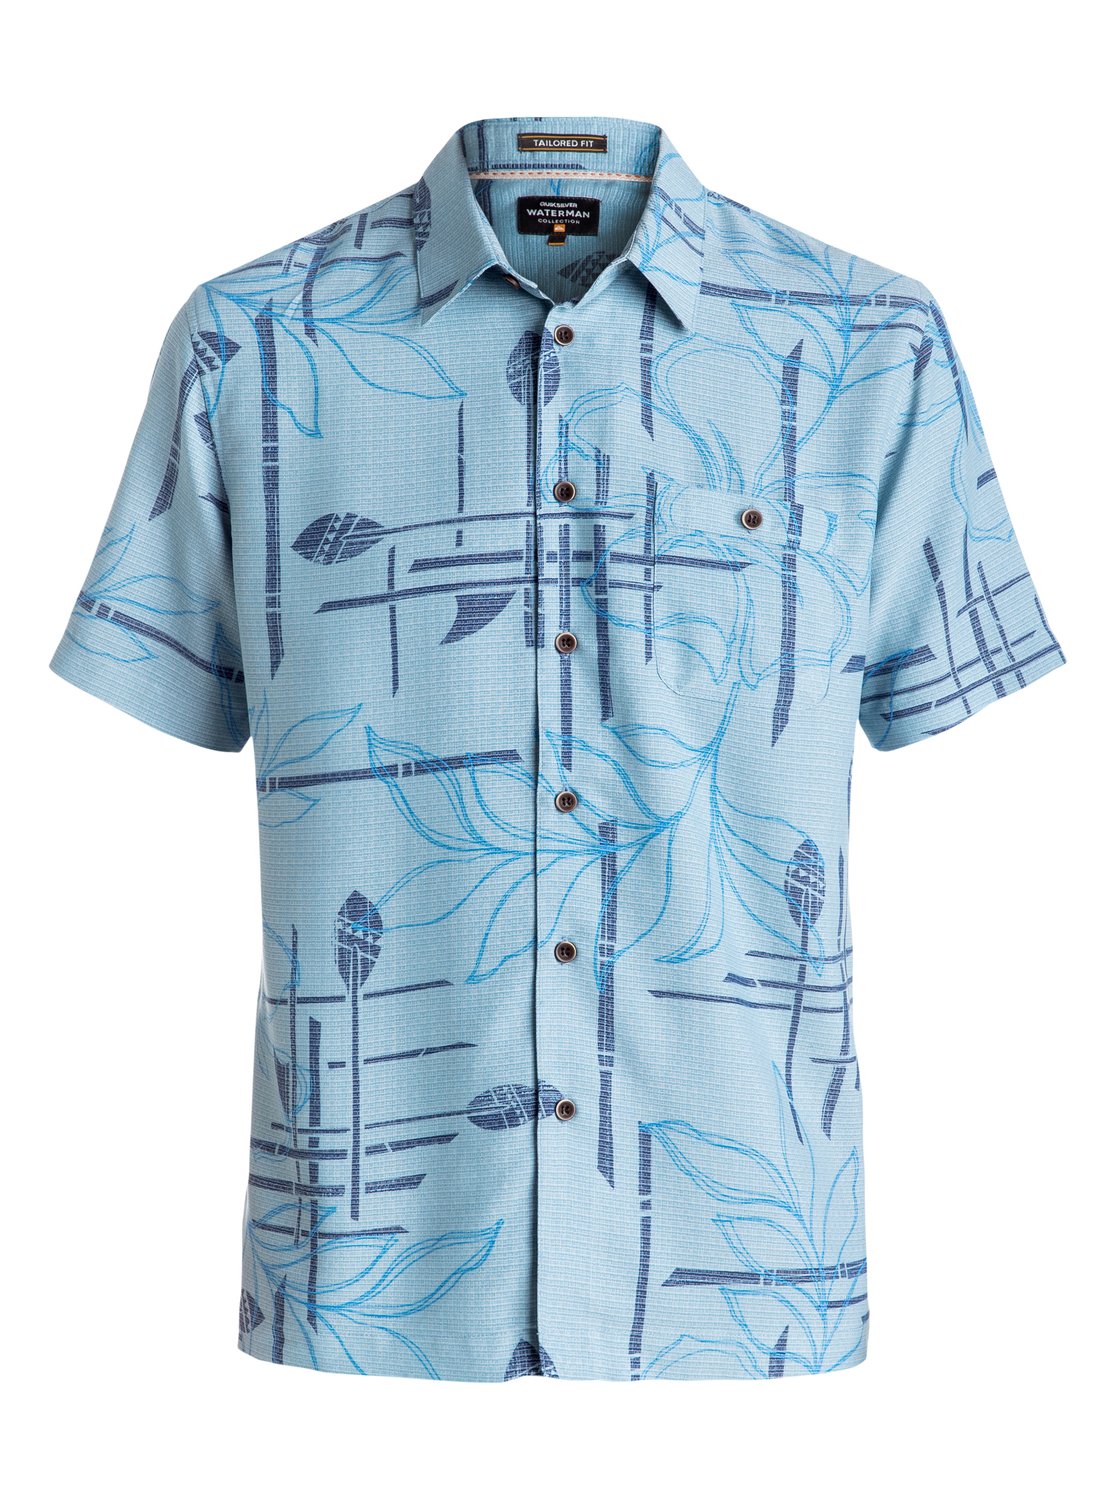 Waterman Paddle Out Short Sleeve Shirt EQMWT03021 | Quiksilver